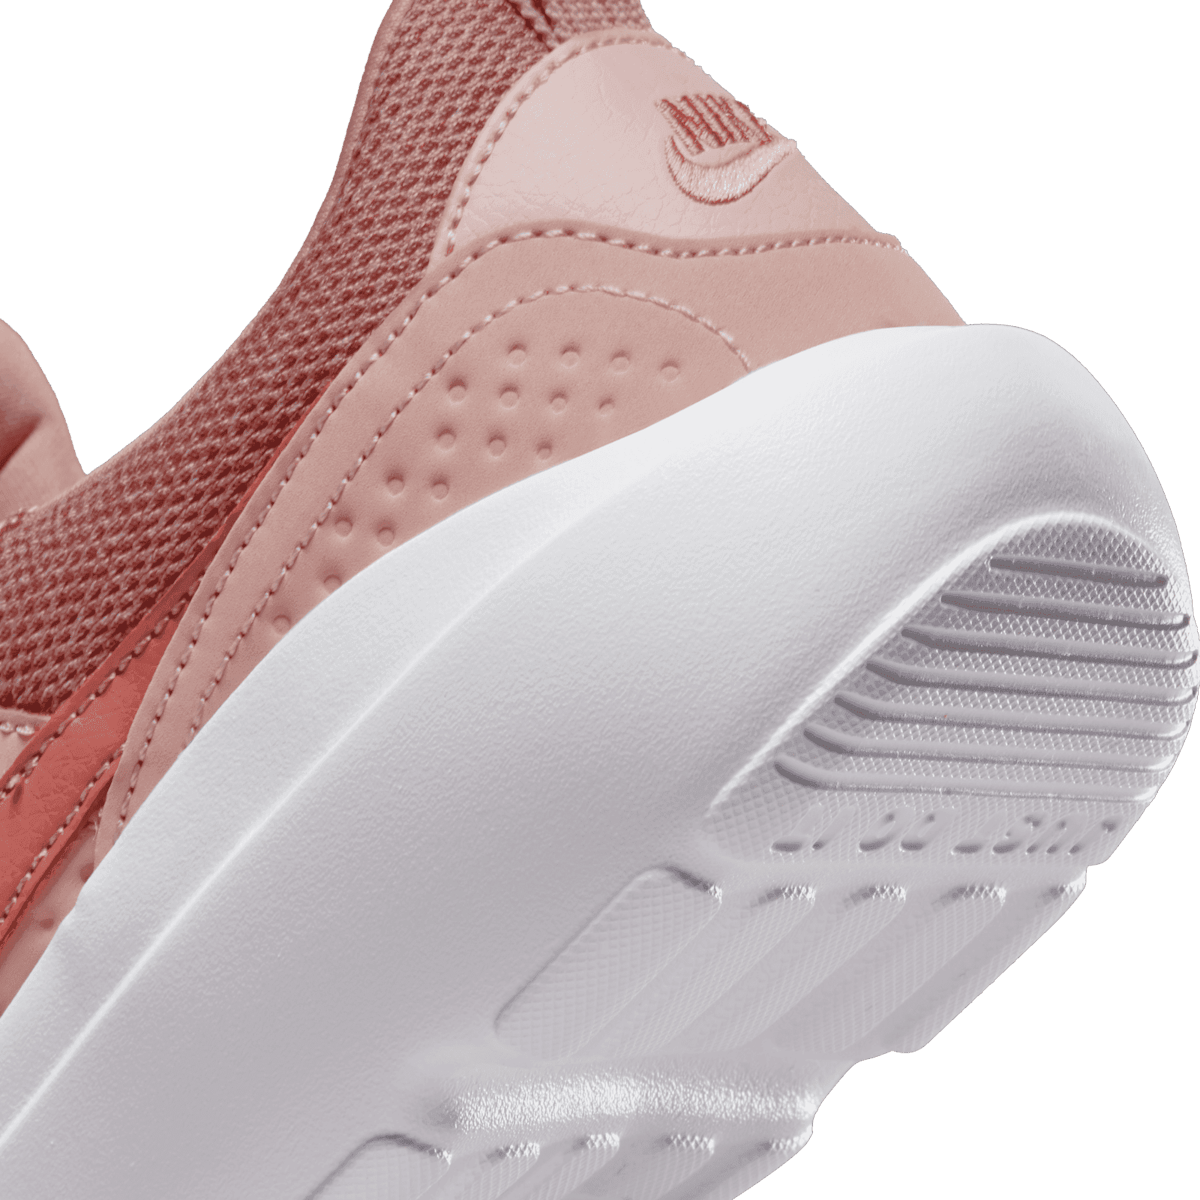 Nike AD Comfort Shoes in Pink - DJ1001-600 Raffles and Release Date